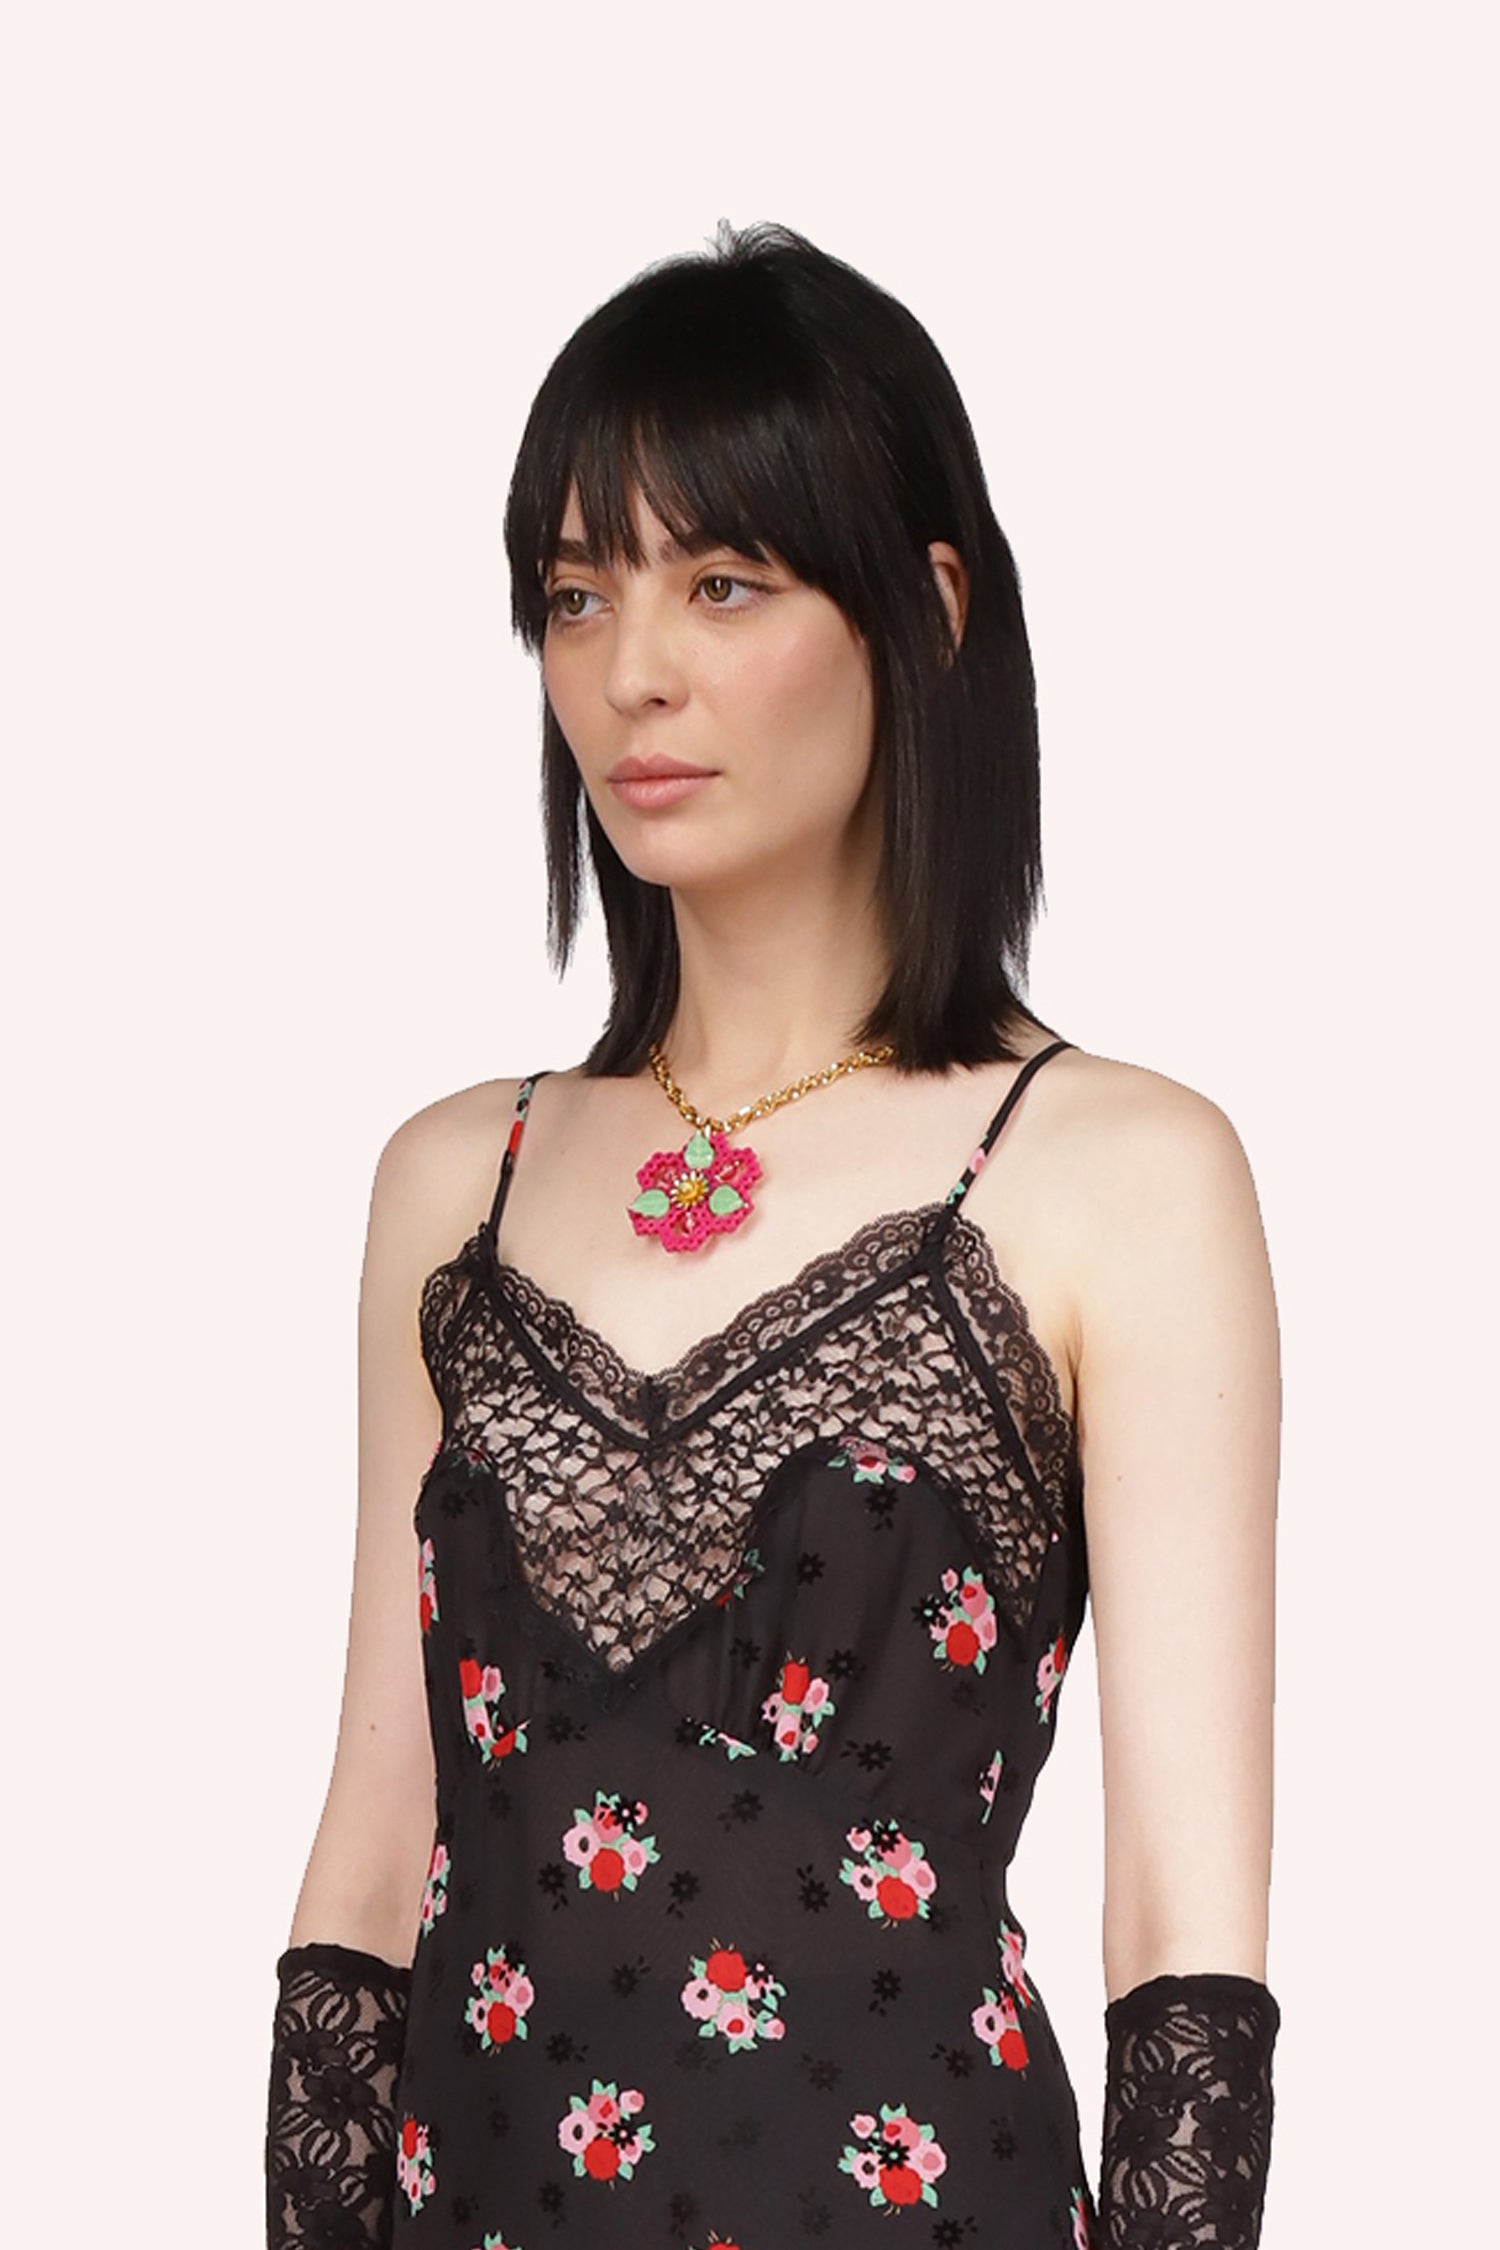 The Anna Sui Daisy Chains Necklace Berry Multi is a hexagonal medallion design with a golden chain secured by an S-hook